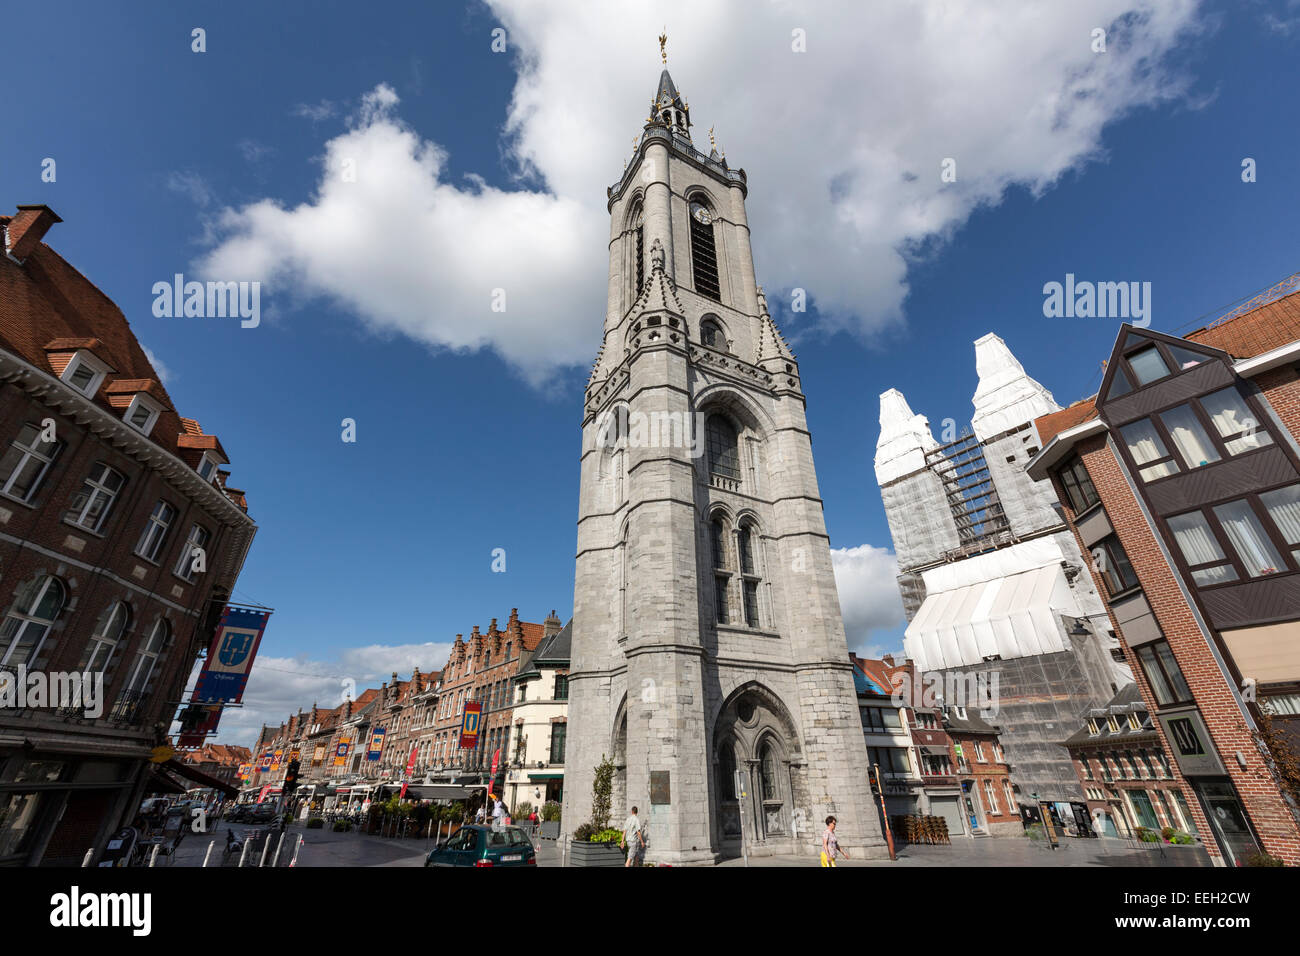 Belfry of Tournai and The cathedral of Notre Dame de Tournai Stock Photo